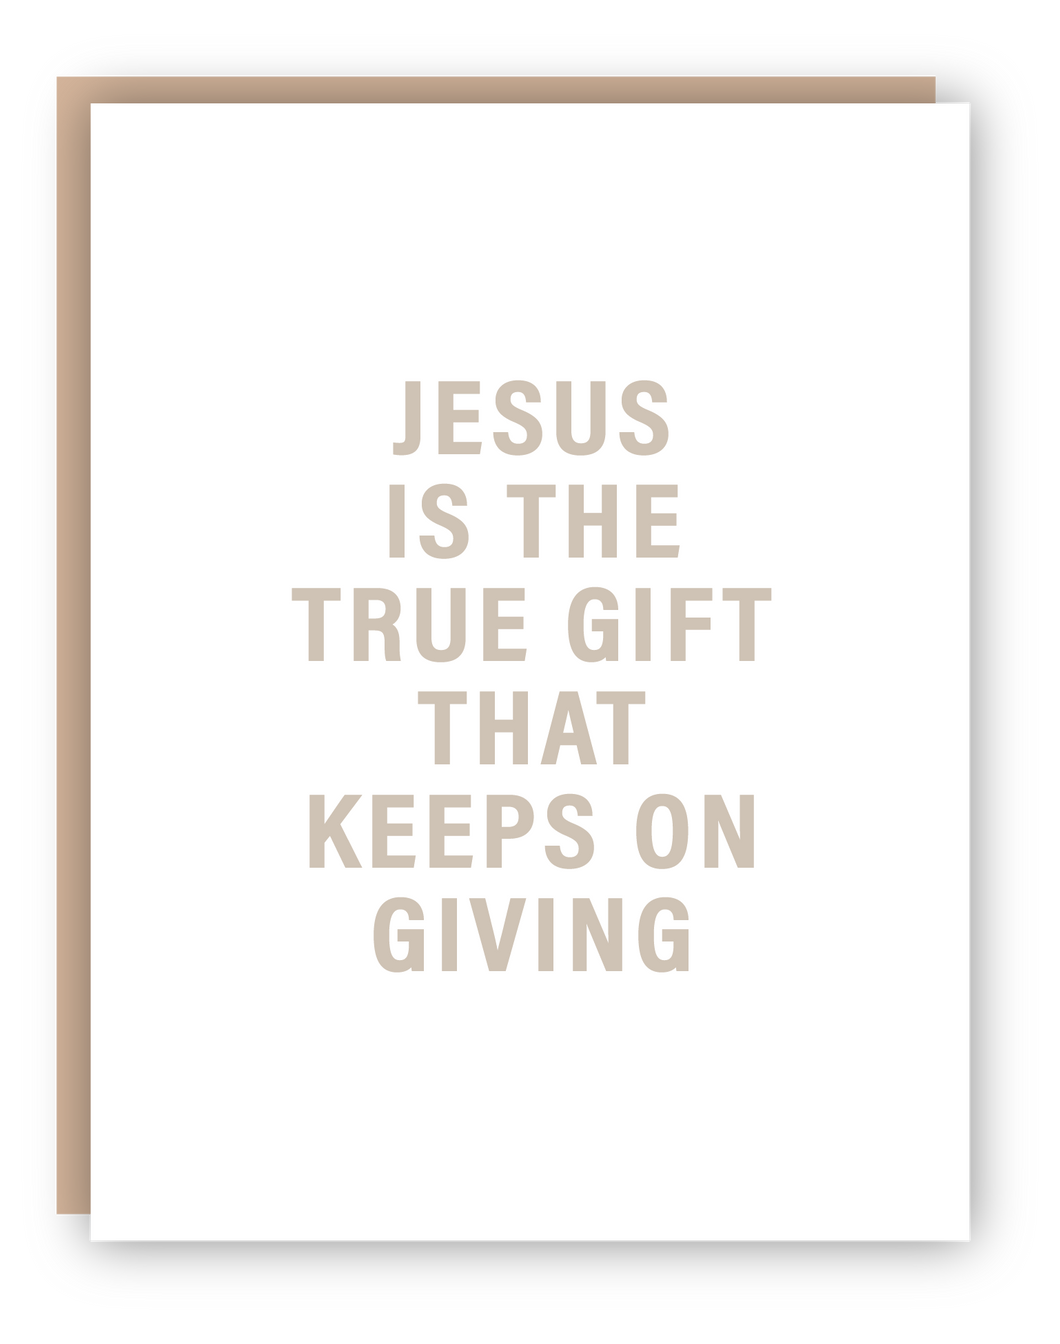 JESUS IS THE GIFT